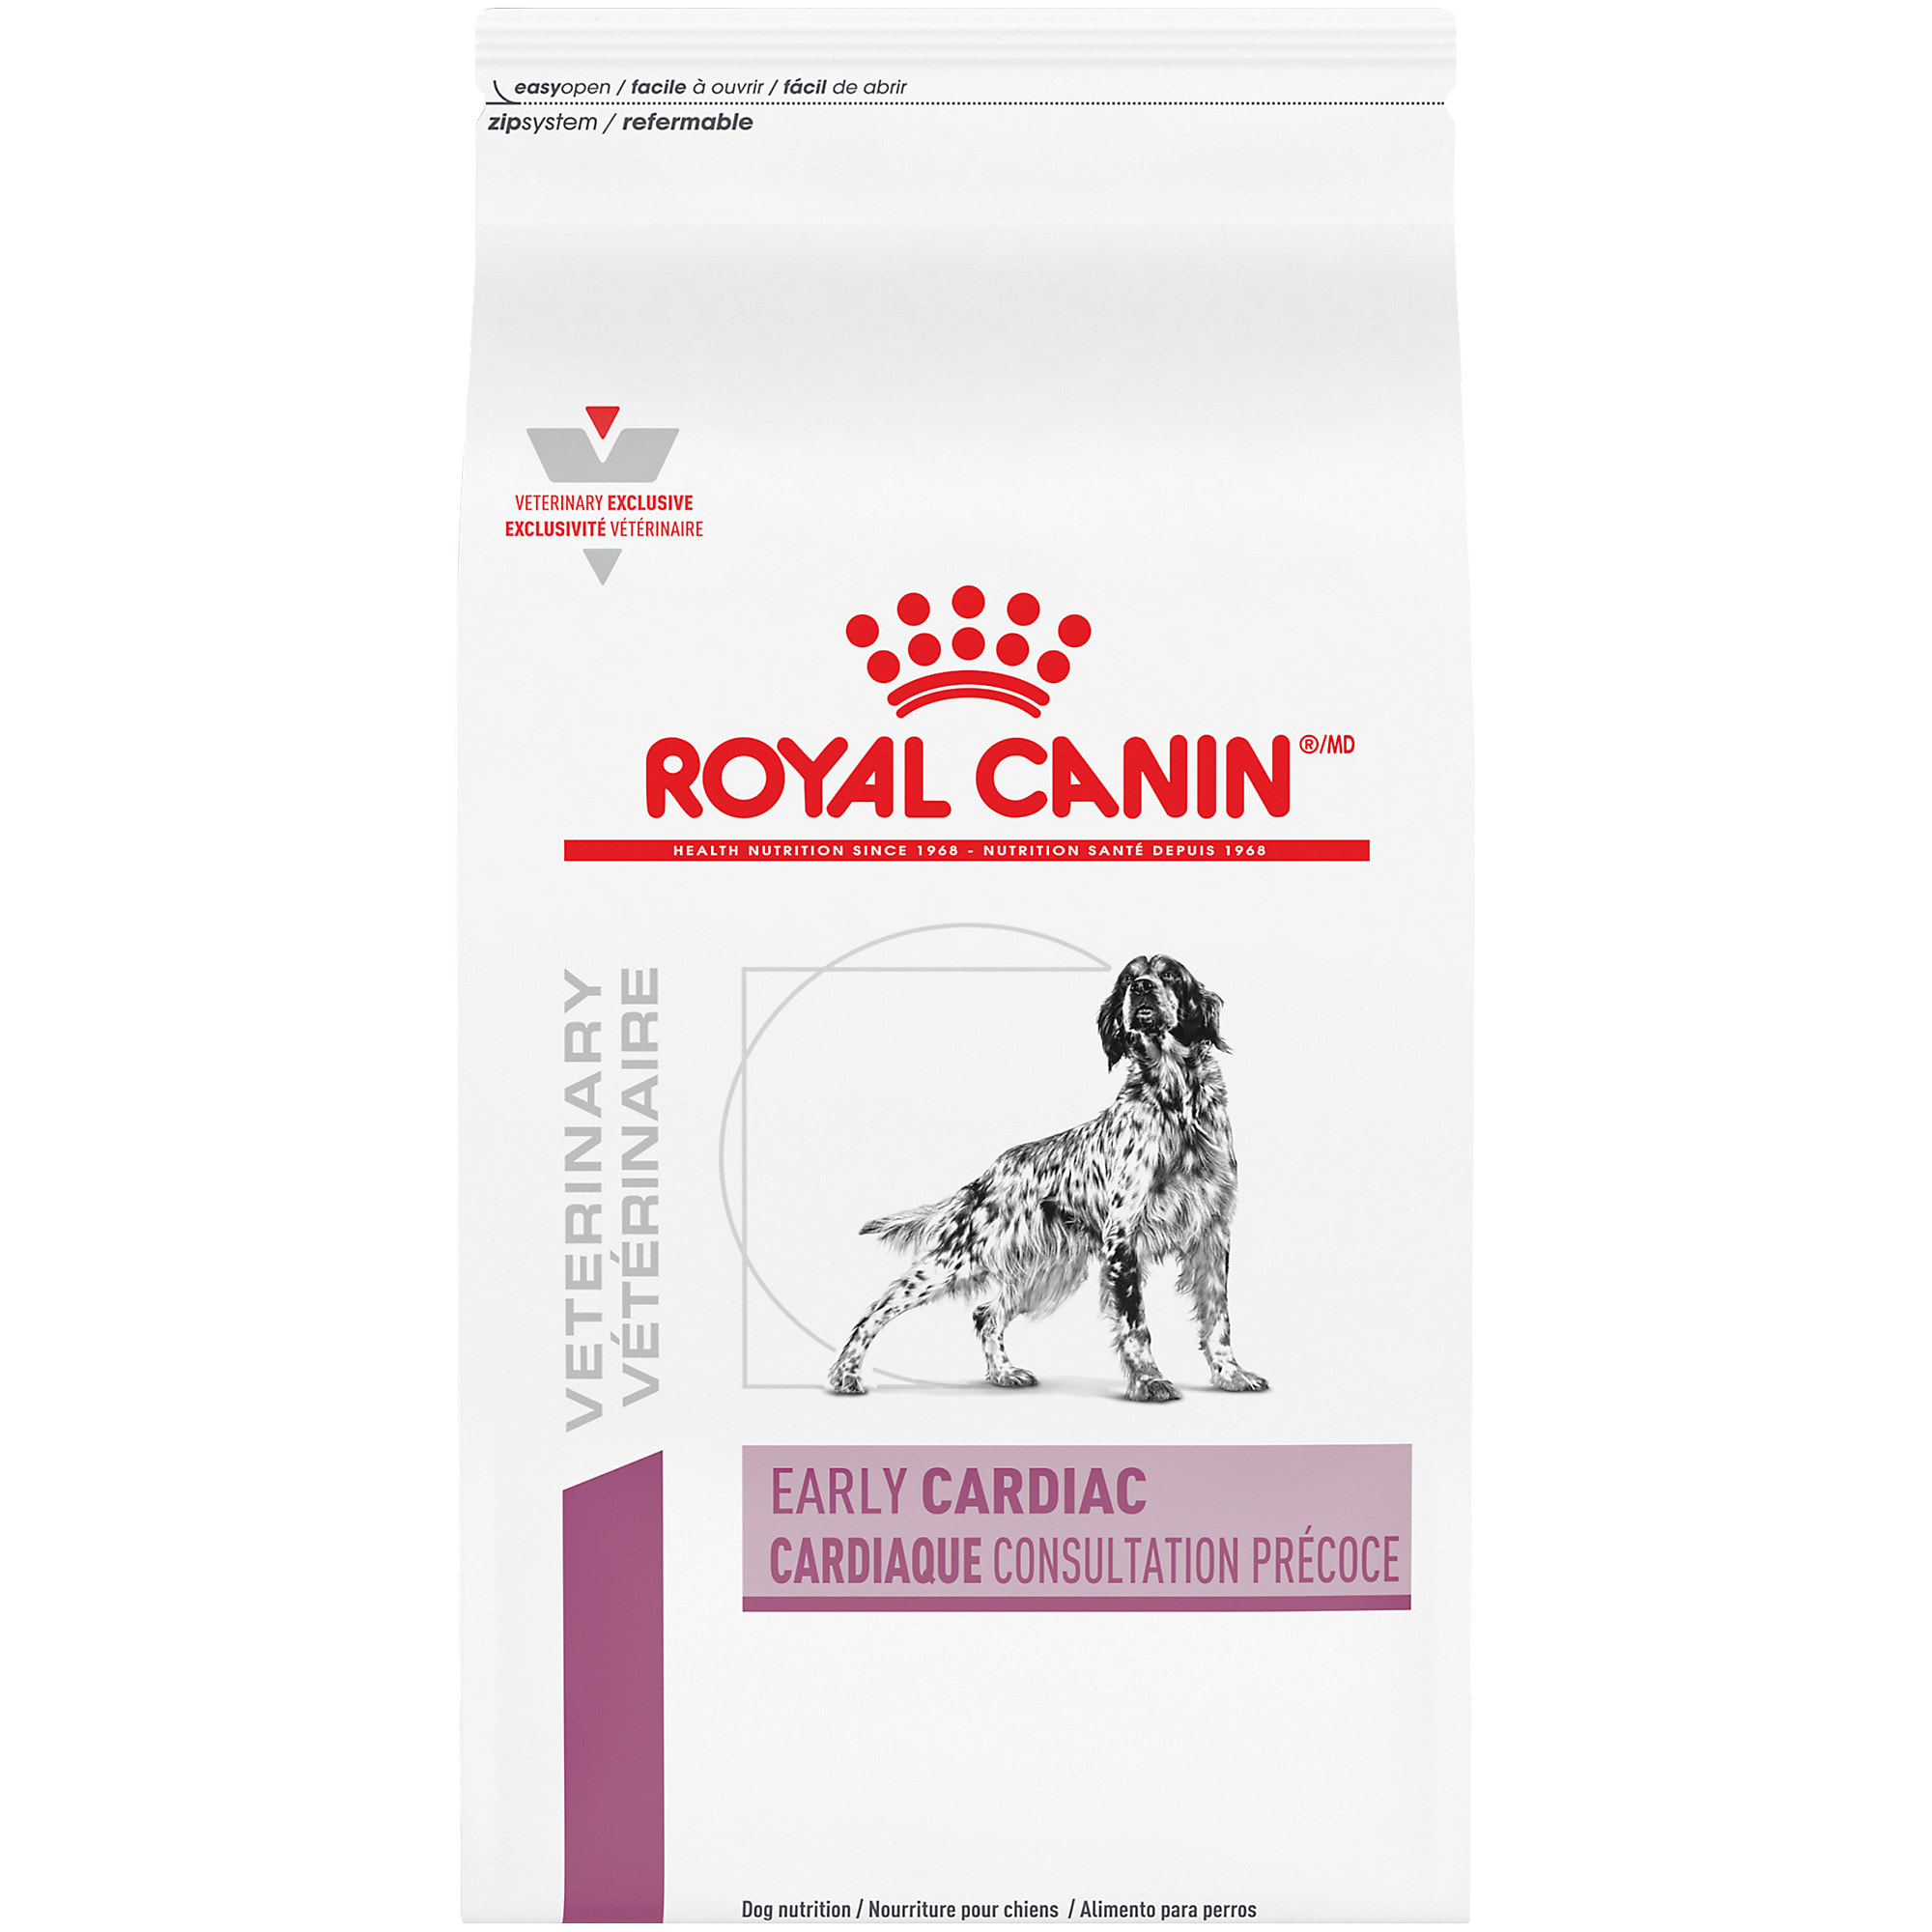 cheapest place to buy royal canin dog food